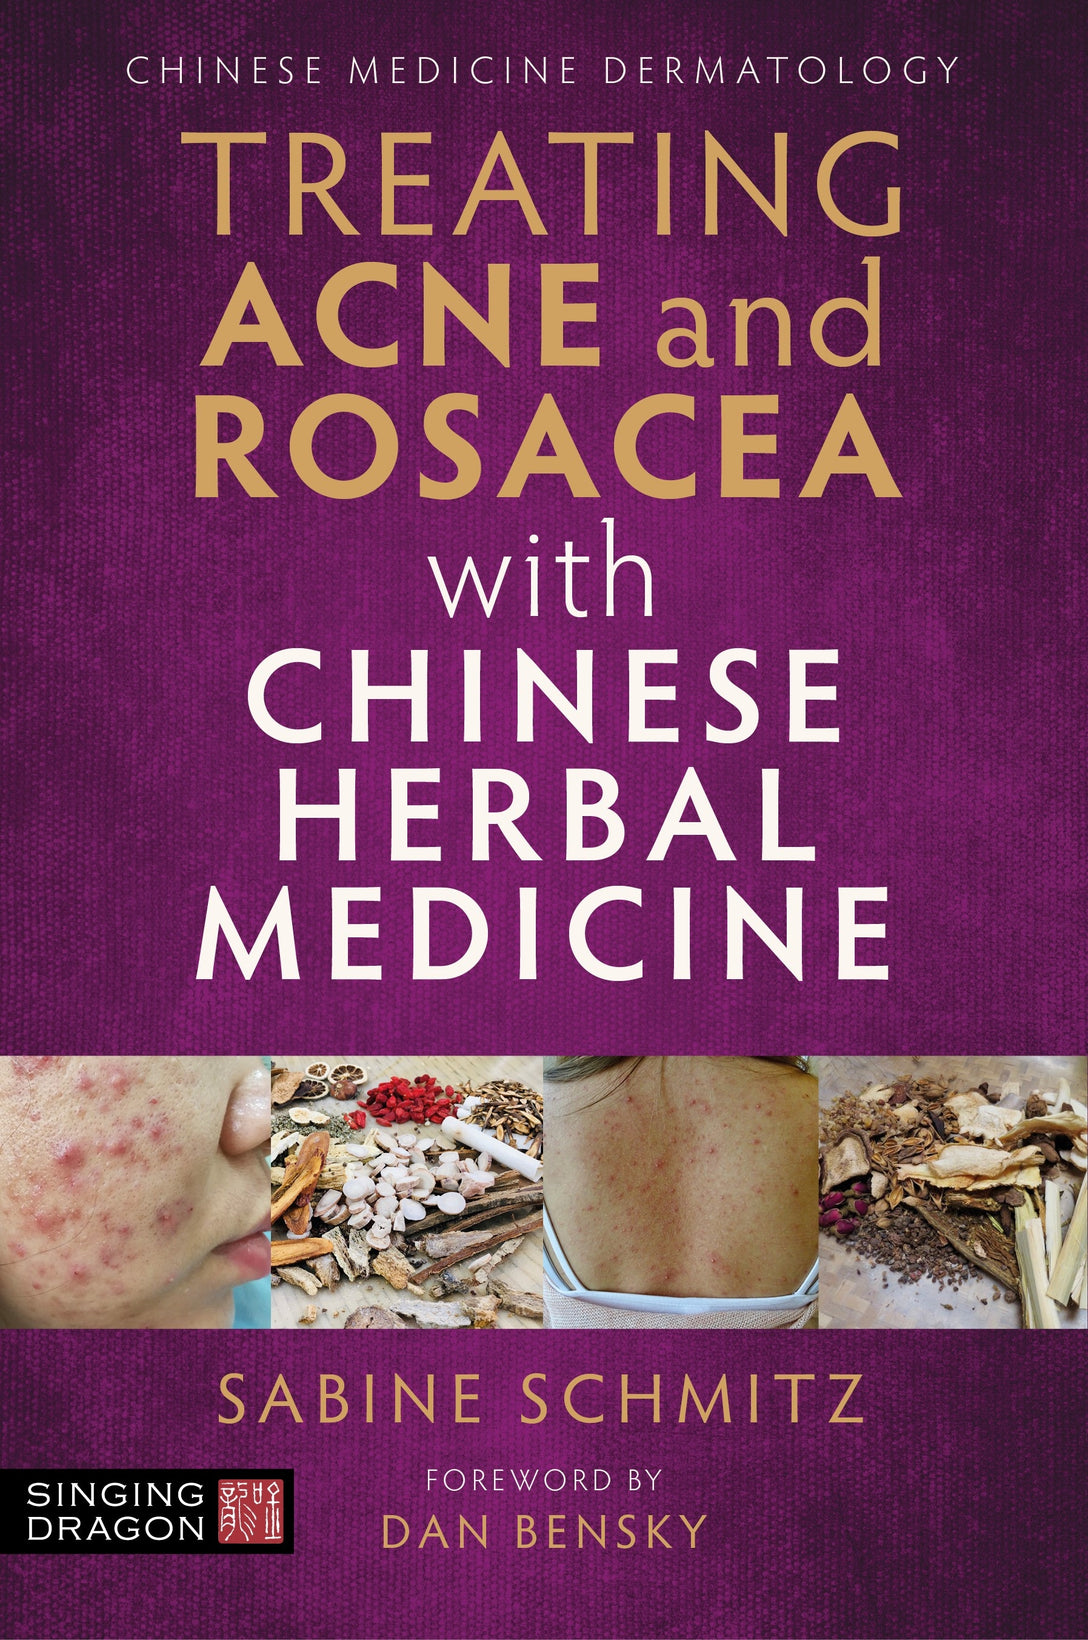 Treating Acne and Rosacea with Chinese Herbal Medicine by Sabine Schmitz, Dan Bensky